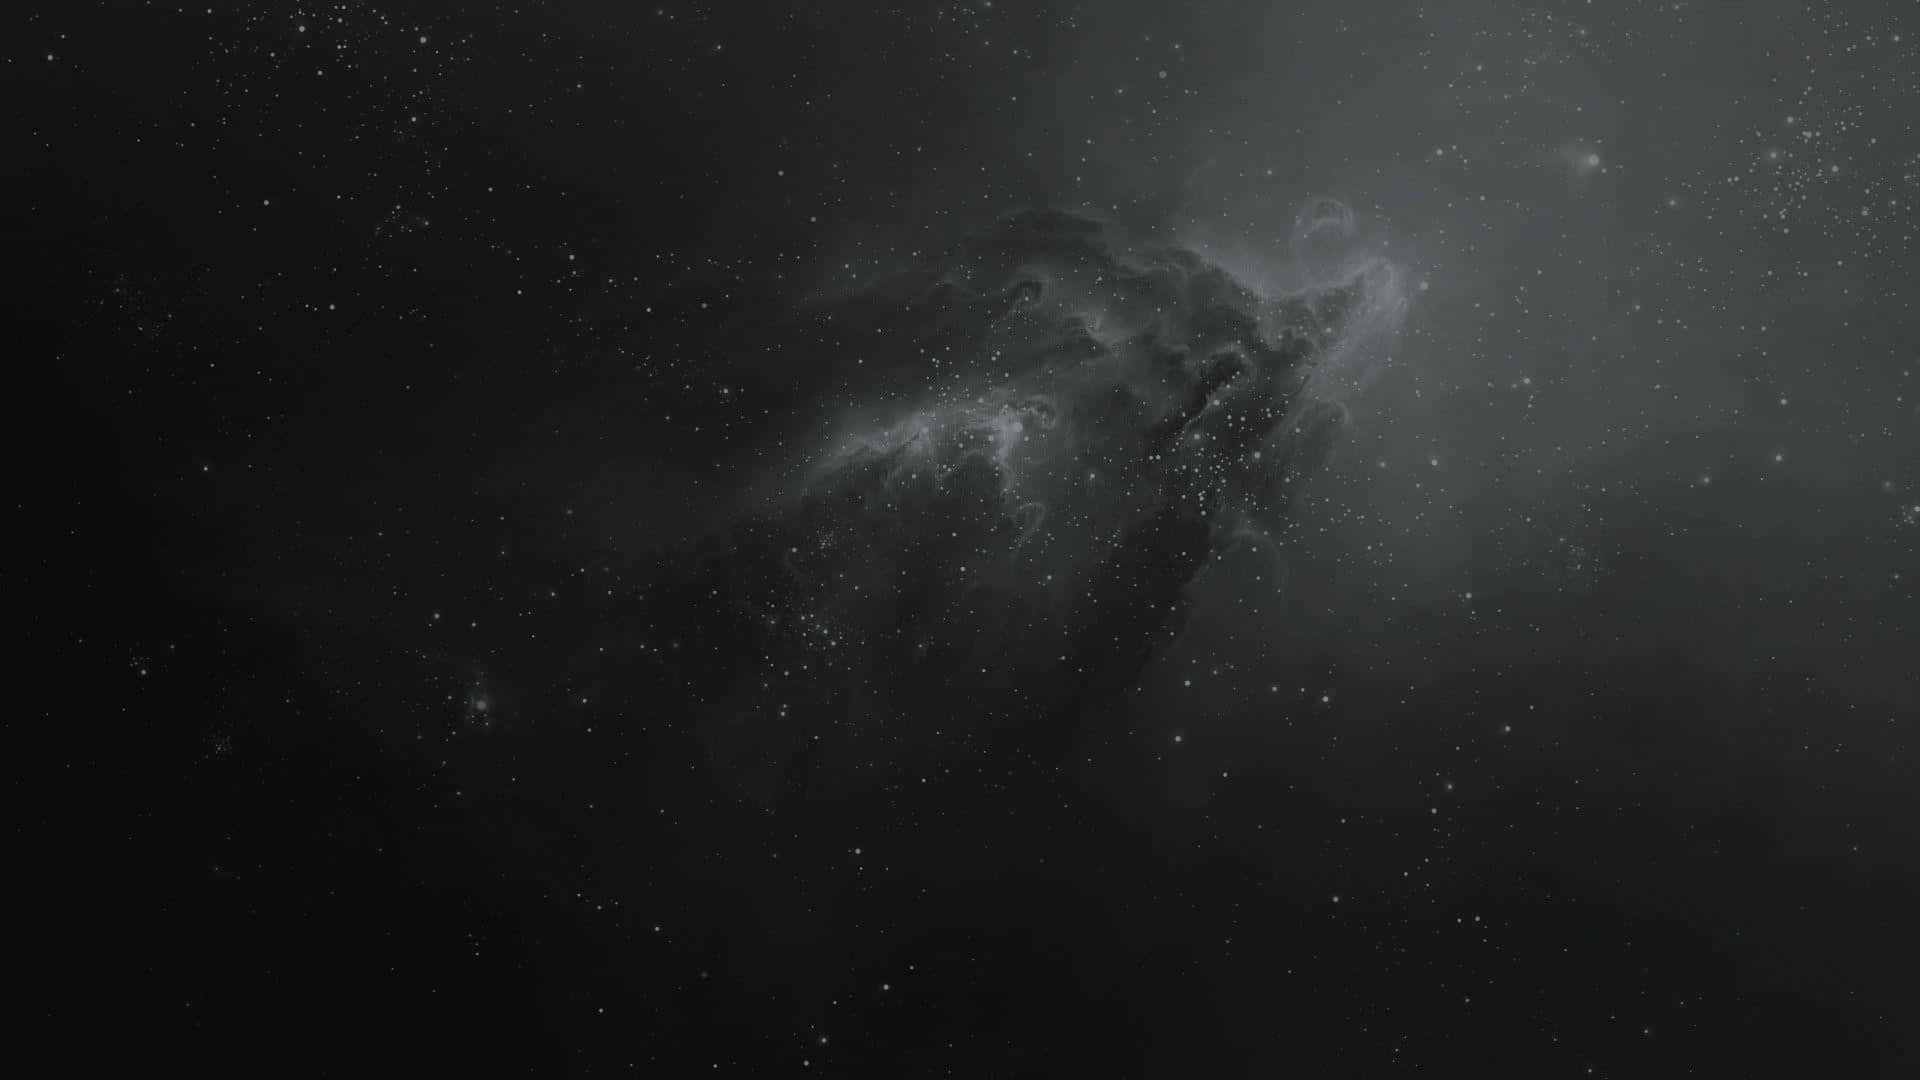 Explore the mysteries of space with a dark aesthetic